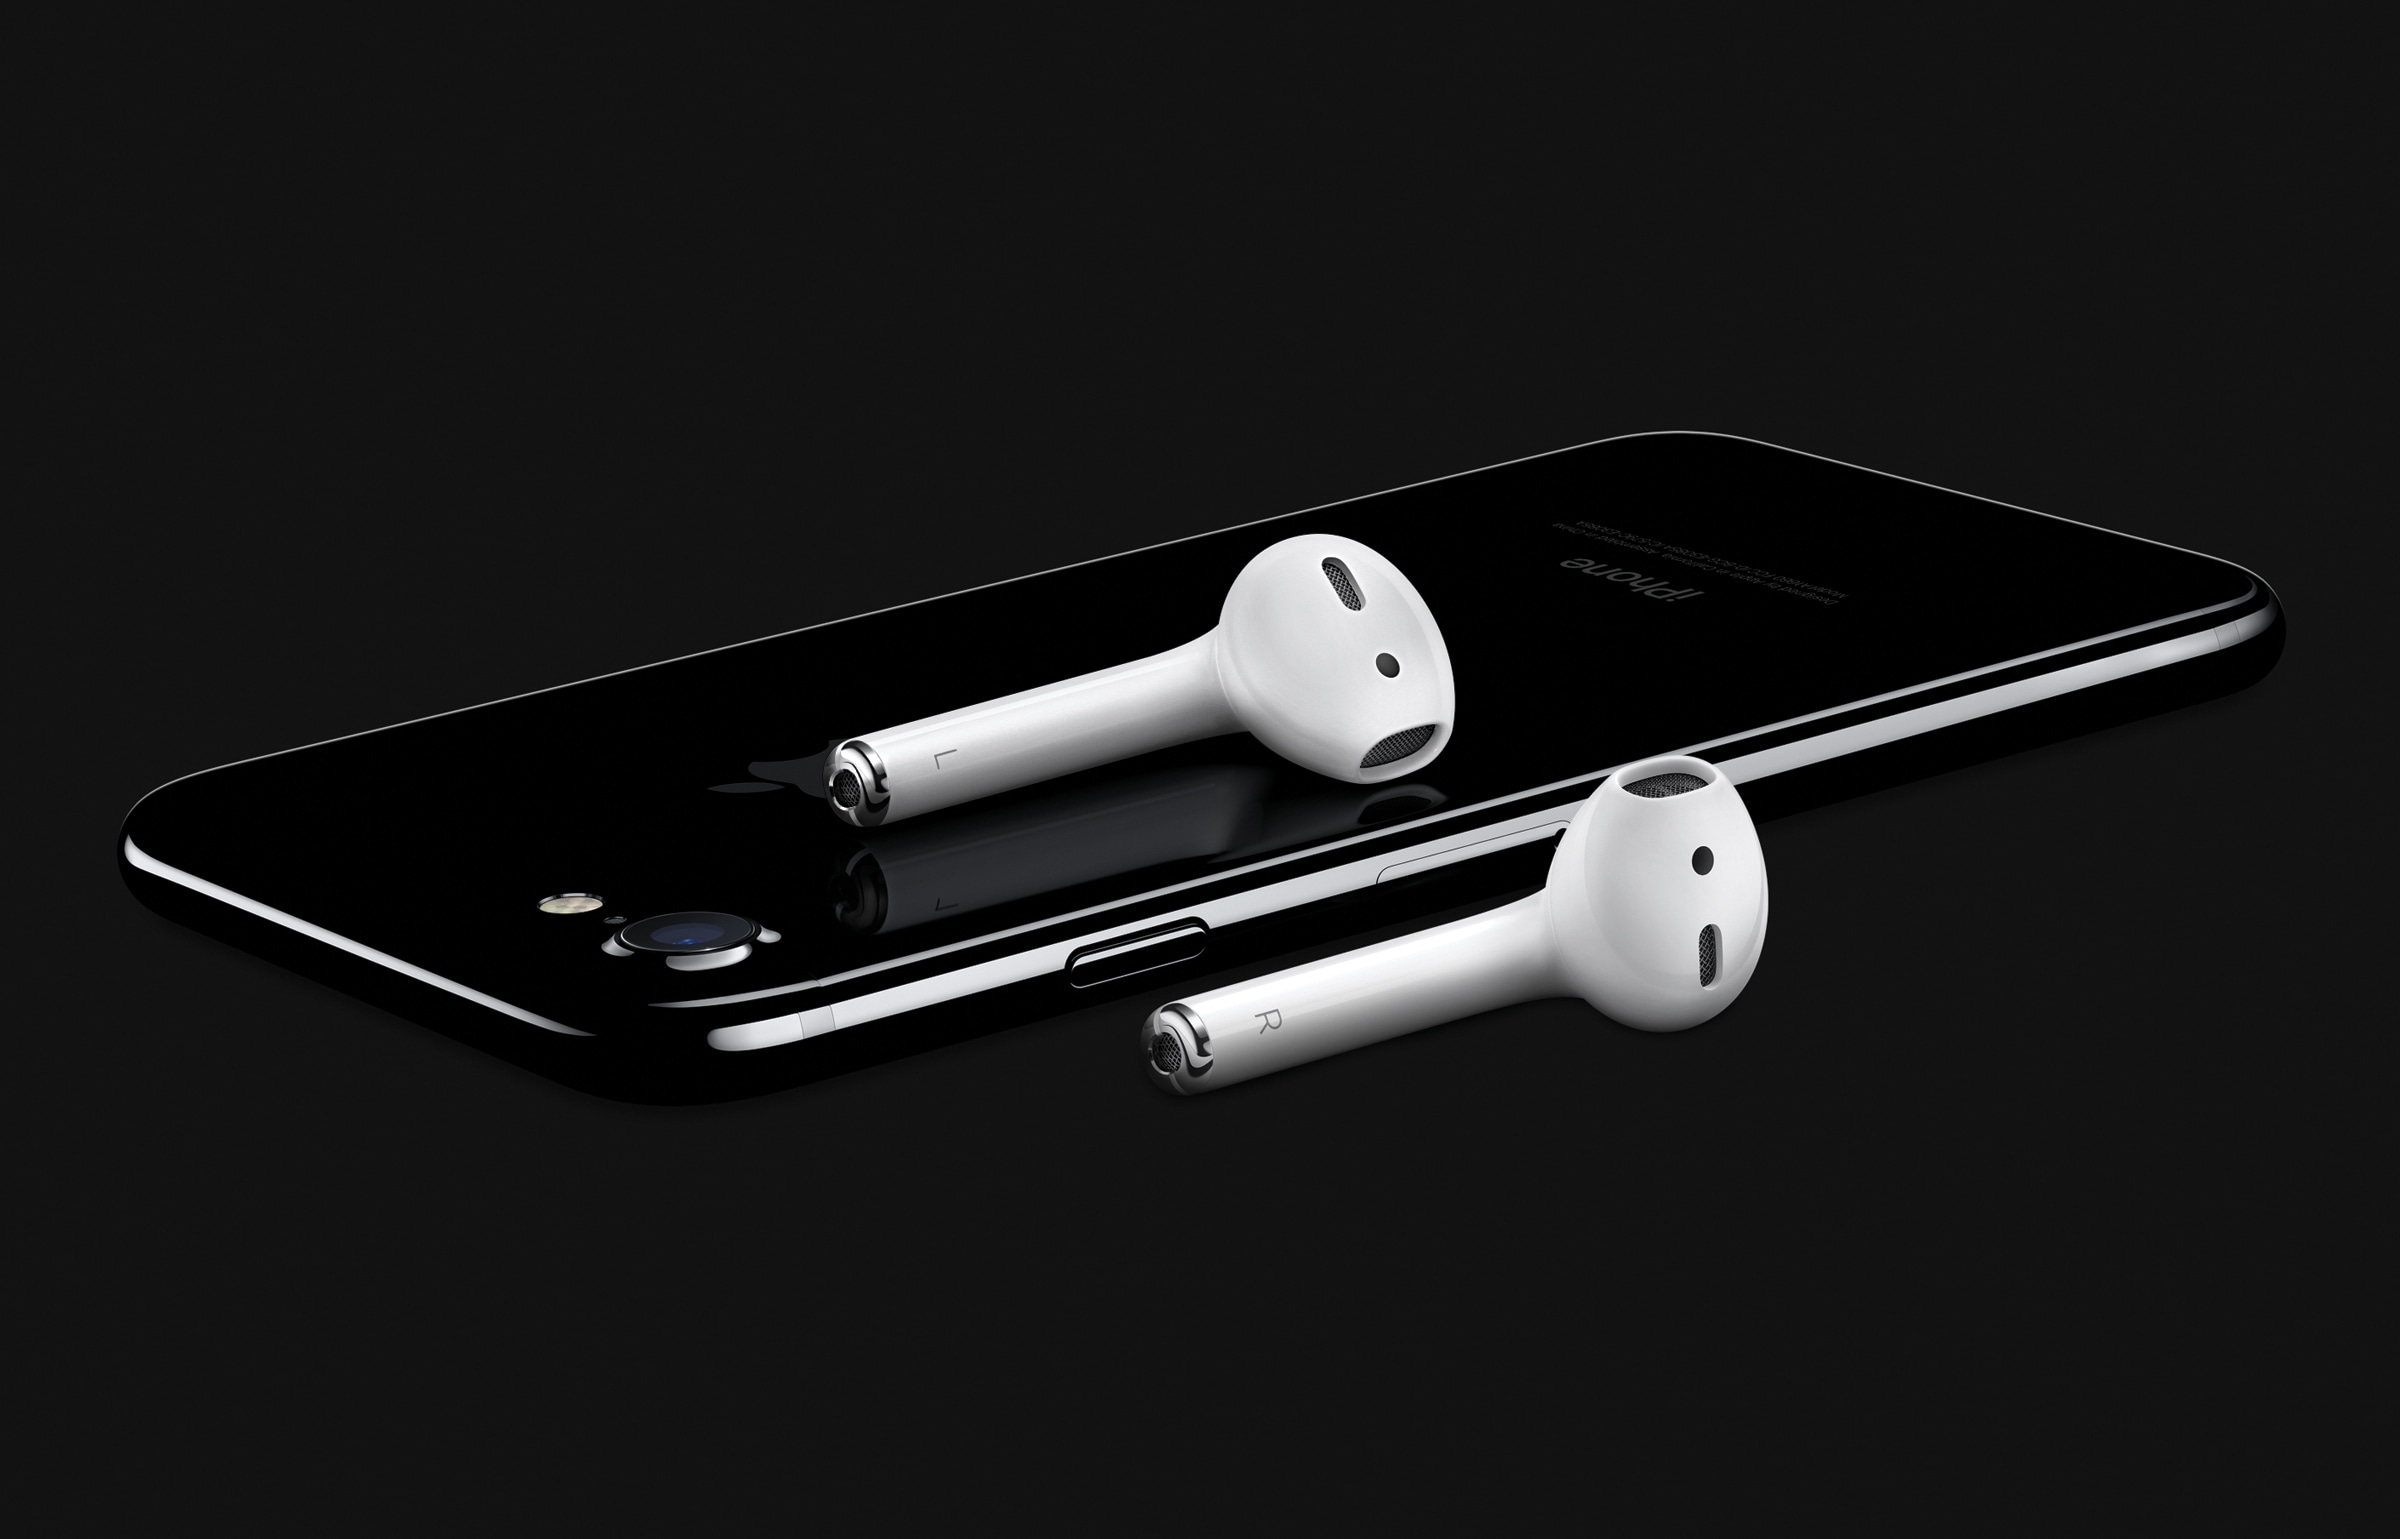 AirPods on iPhone 7 musta joa peal